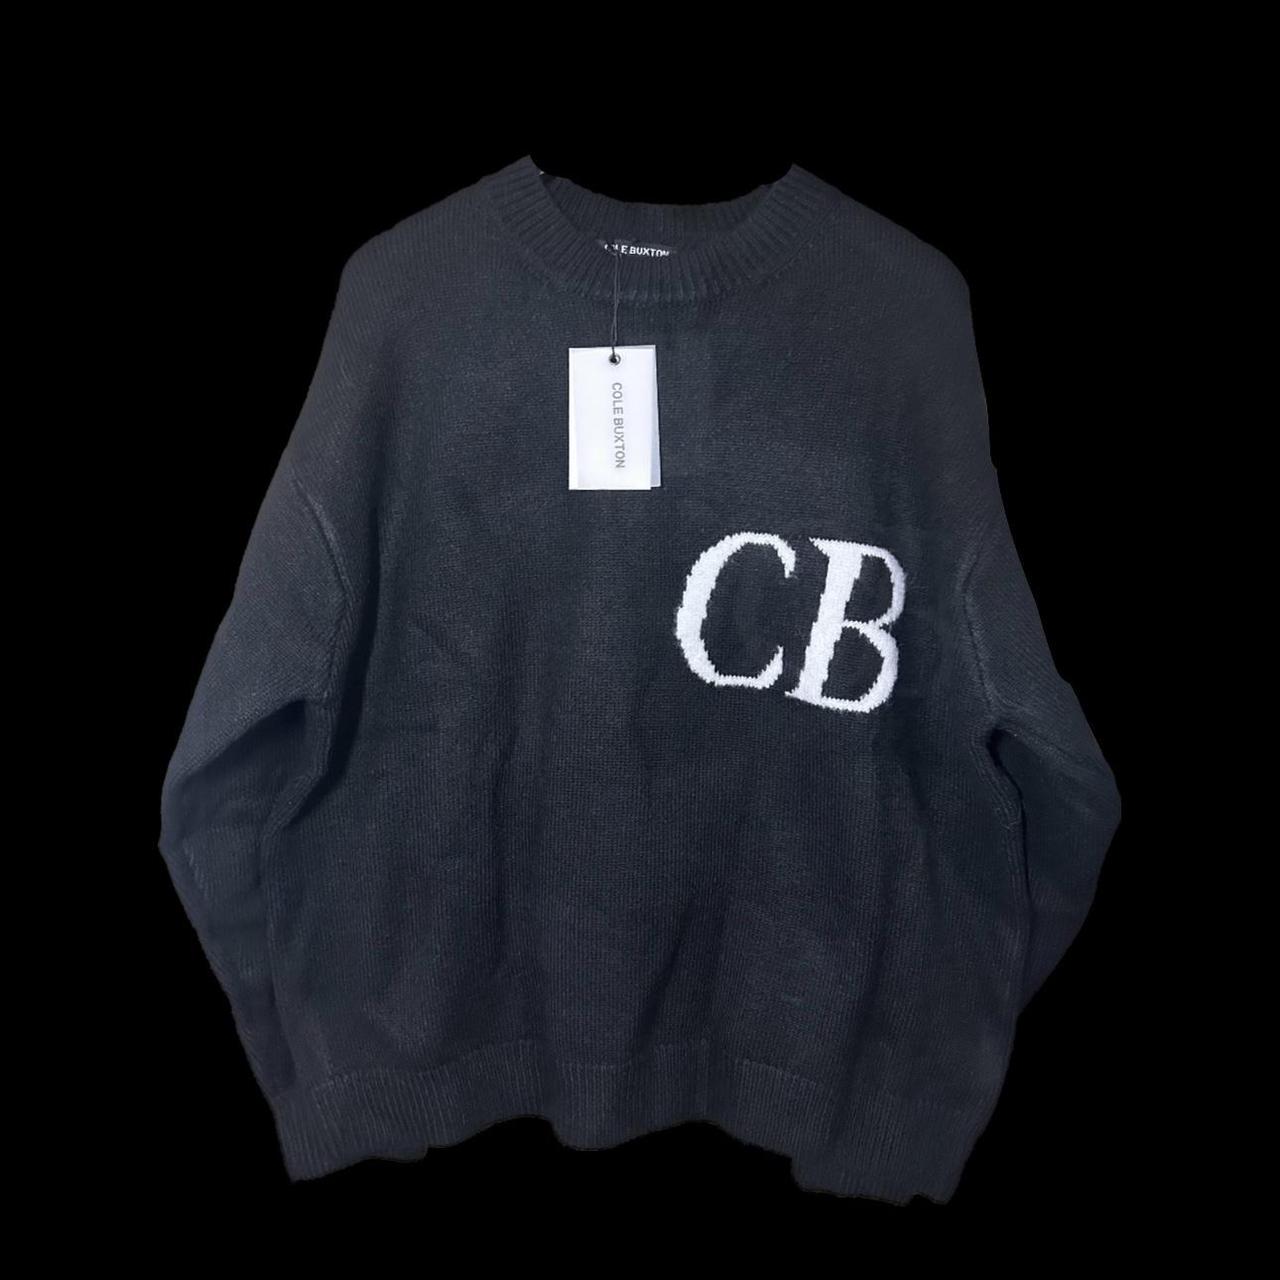 Cole Buxton CB LOGO KNIT Jumper - Brand new with... - Depop